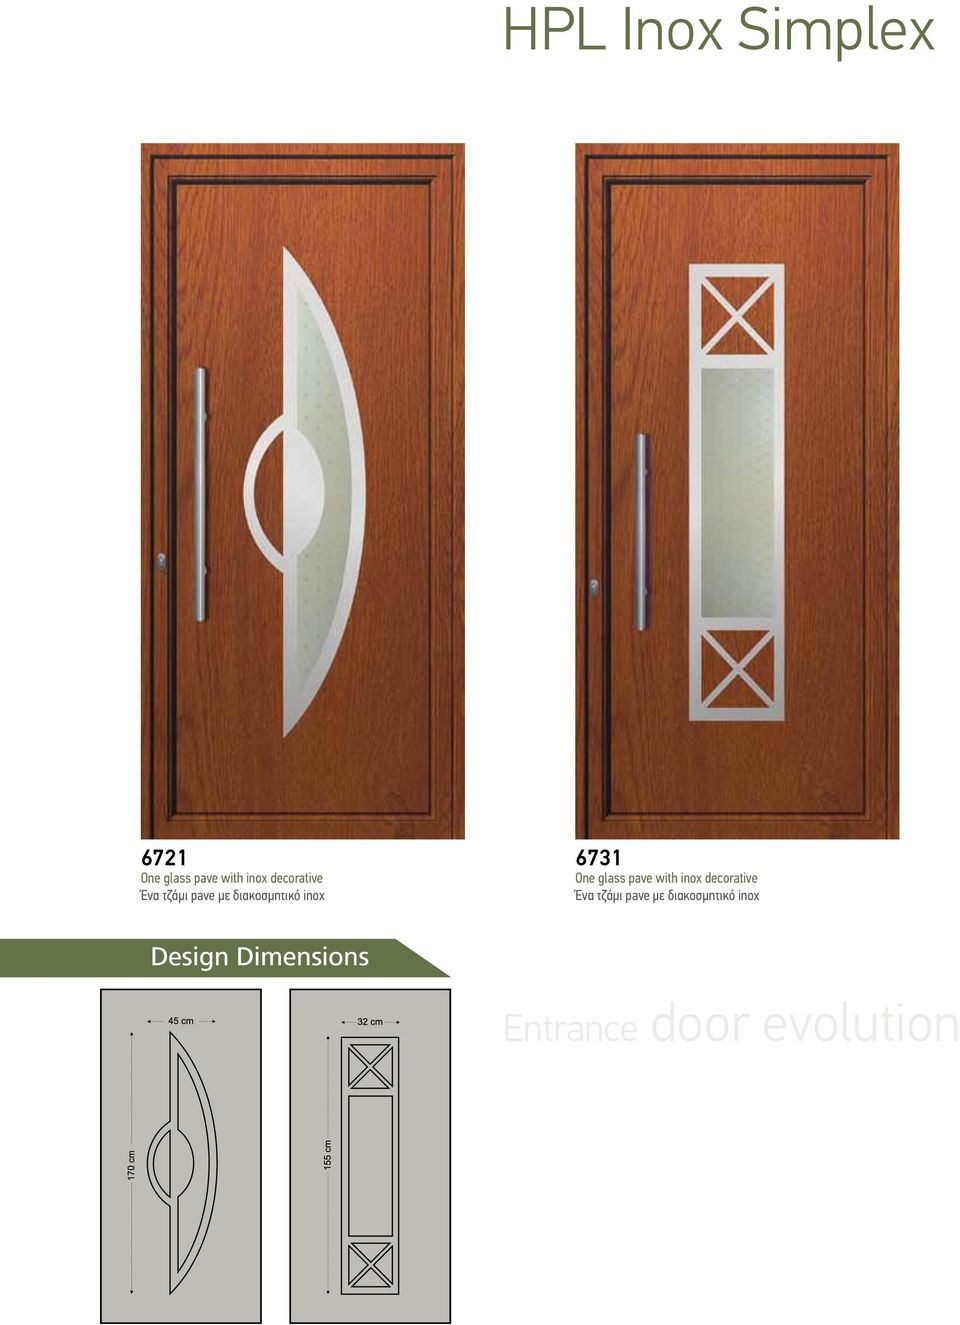 6731 One glass pave with inox  Entrance door